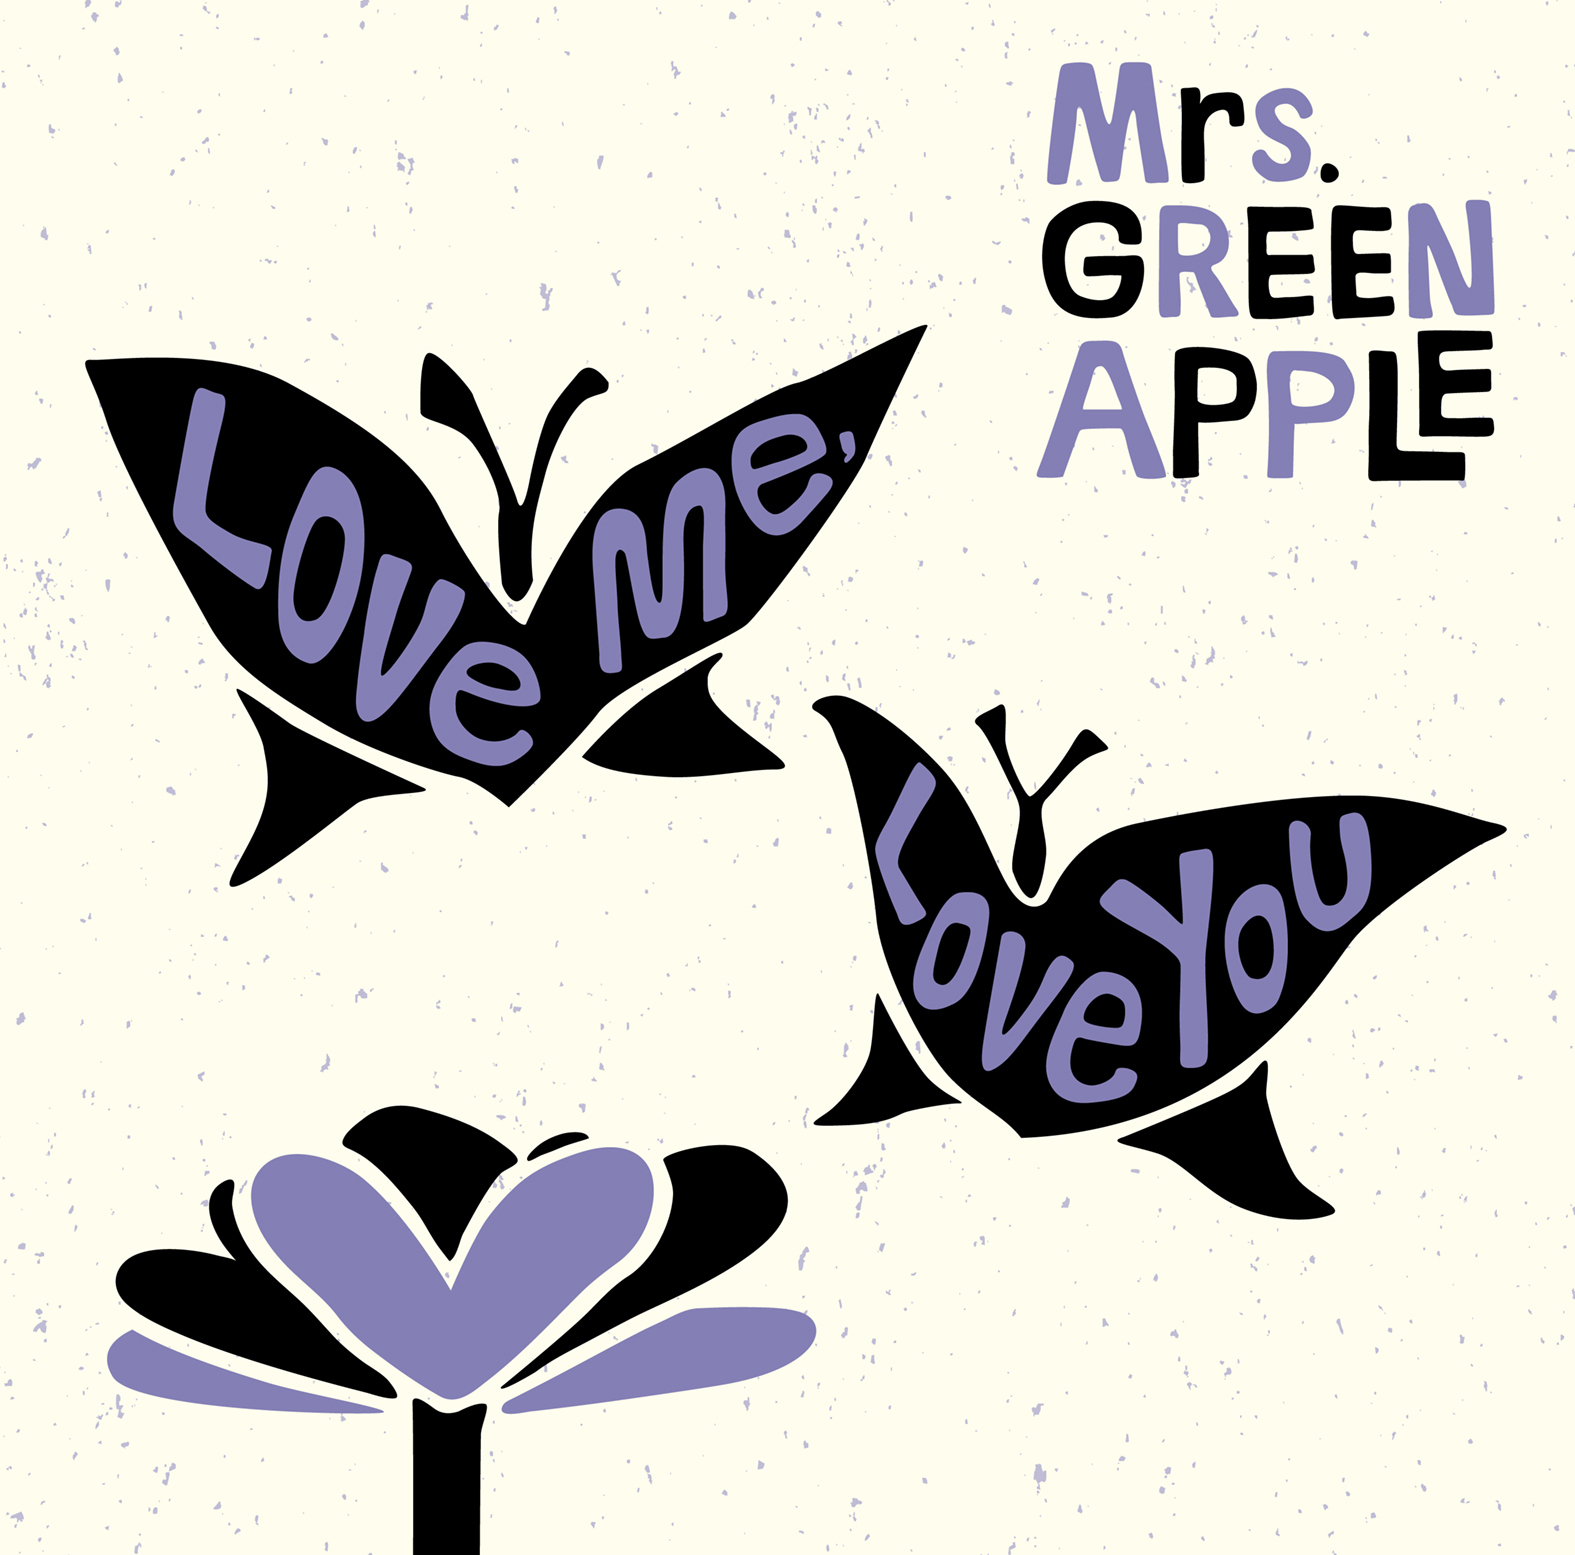 Love me, Love you（初回限定盤） -Mrs. GREEN APPLE OFFICIAL SITE 